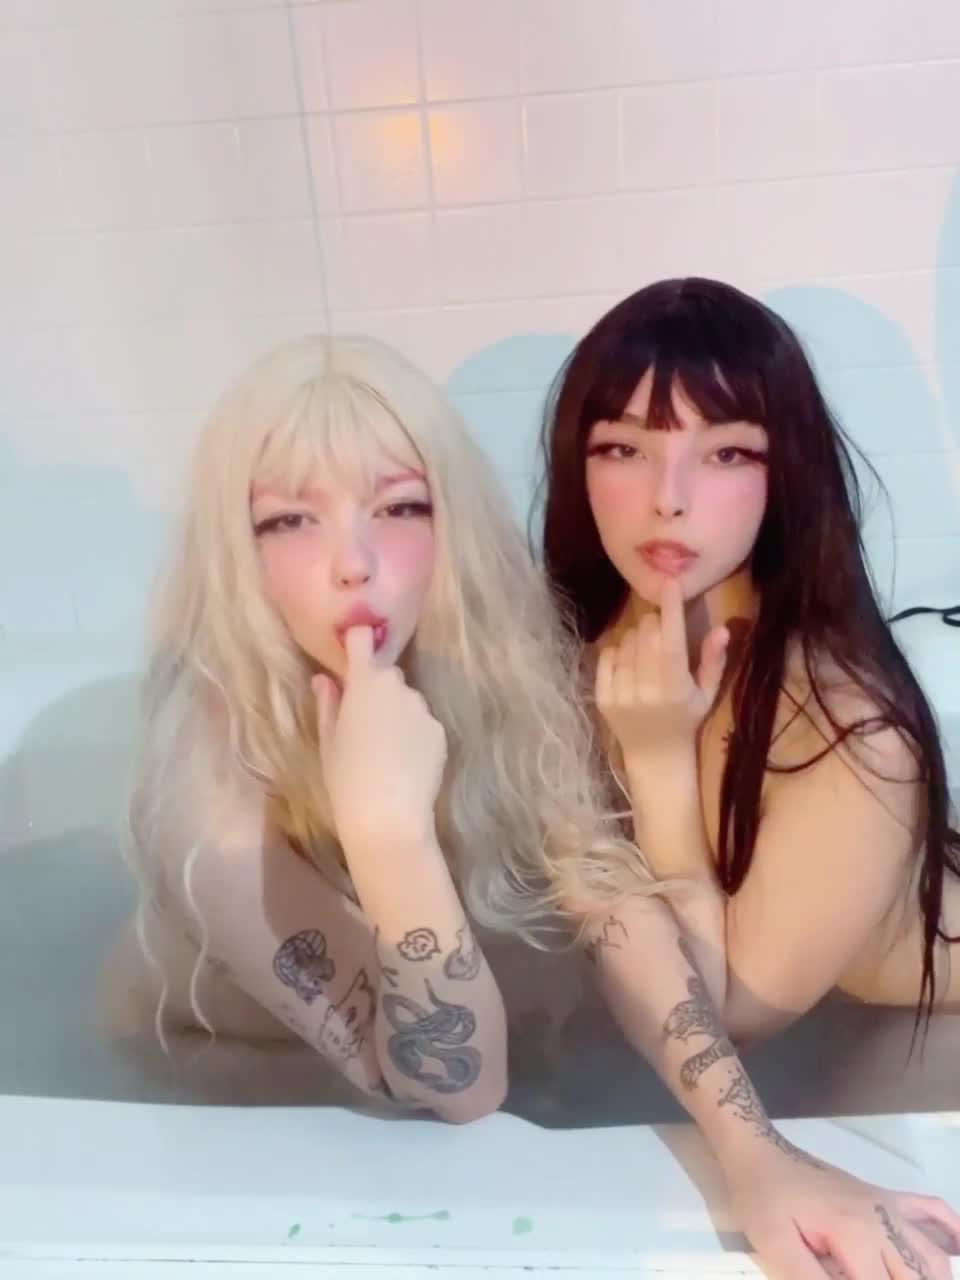 [f] Want to get in the bathtub with me and my new girlfriend? : video clip